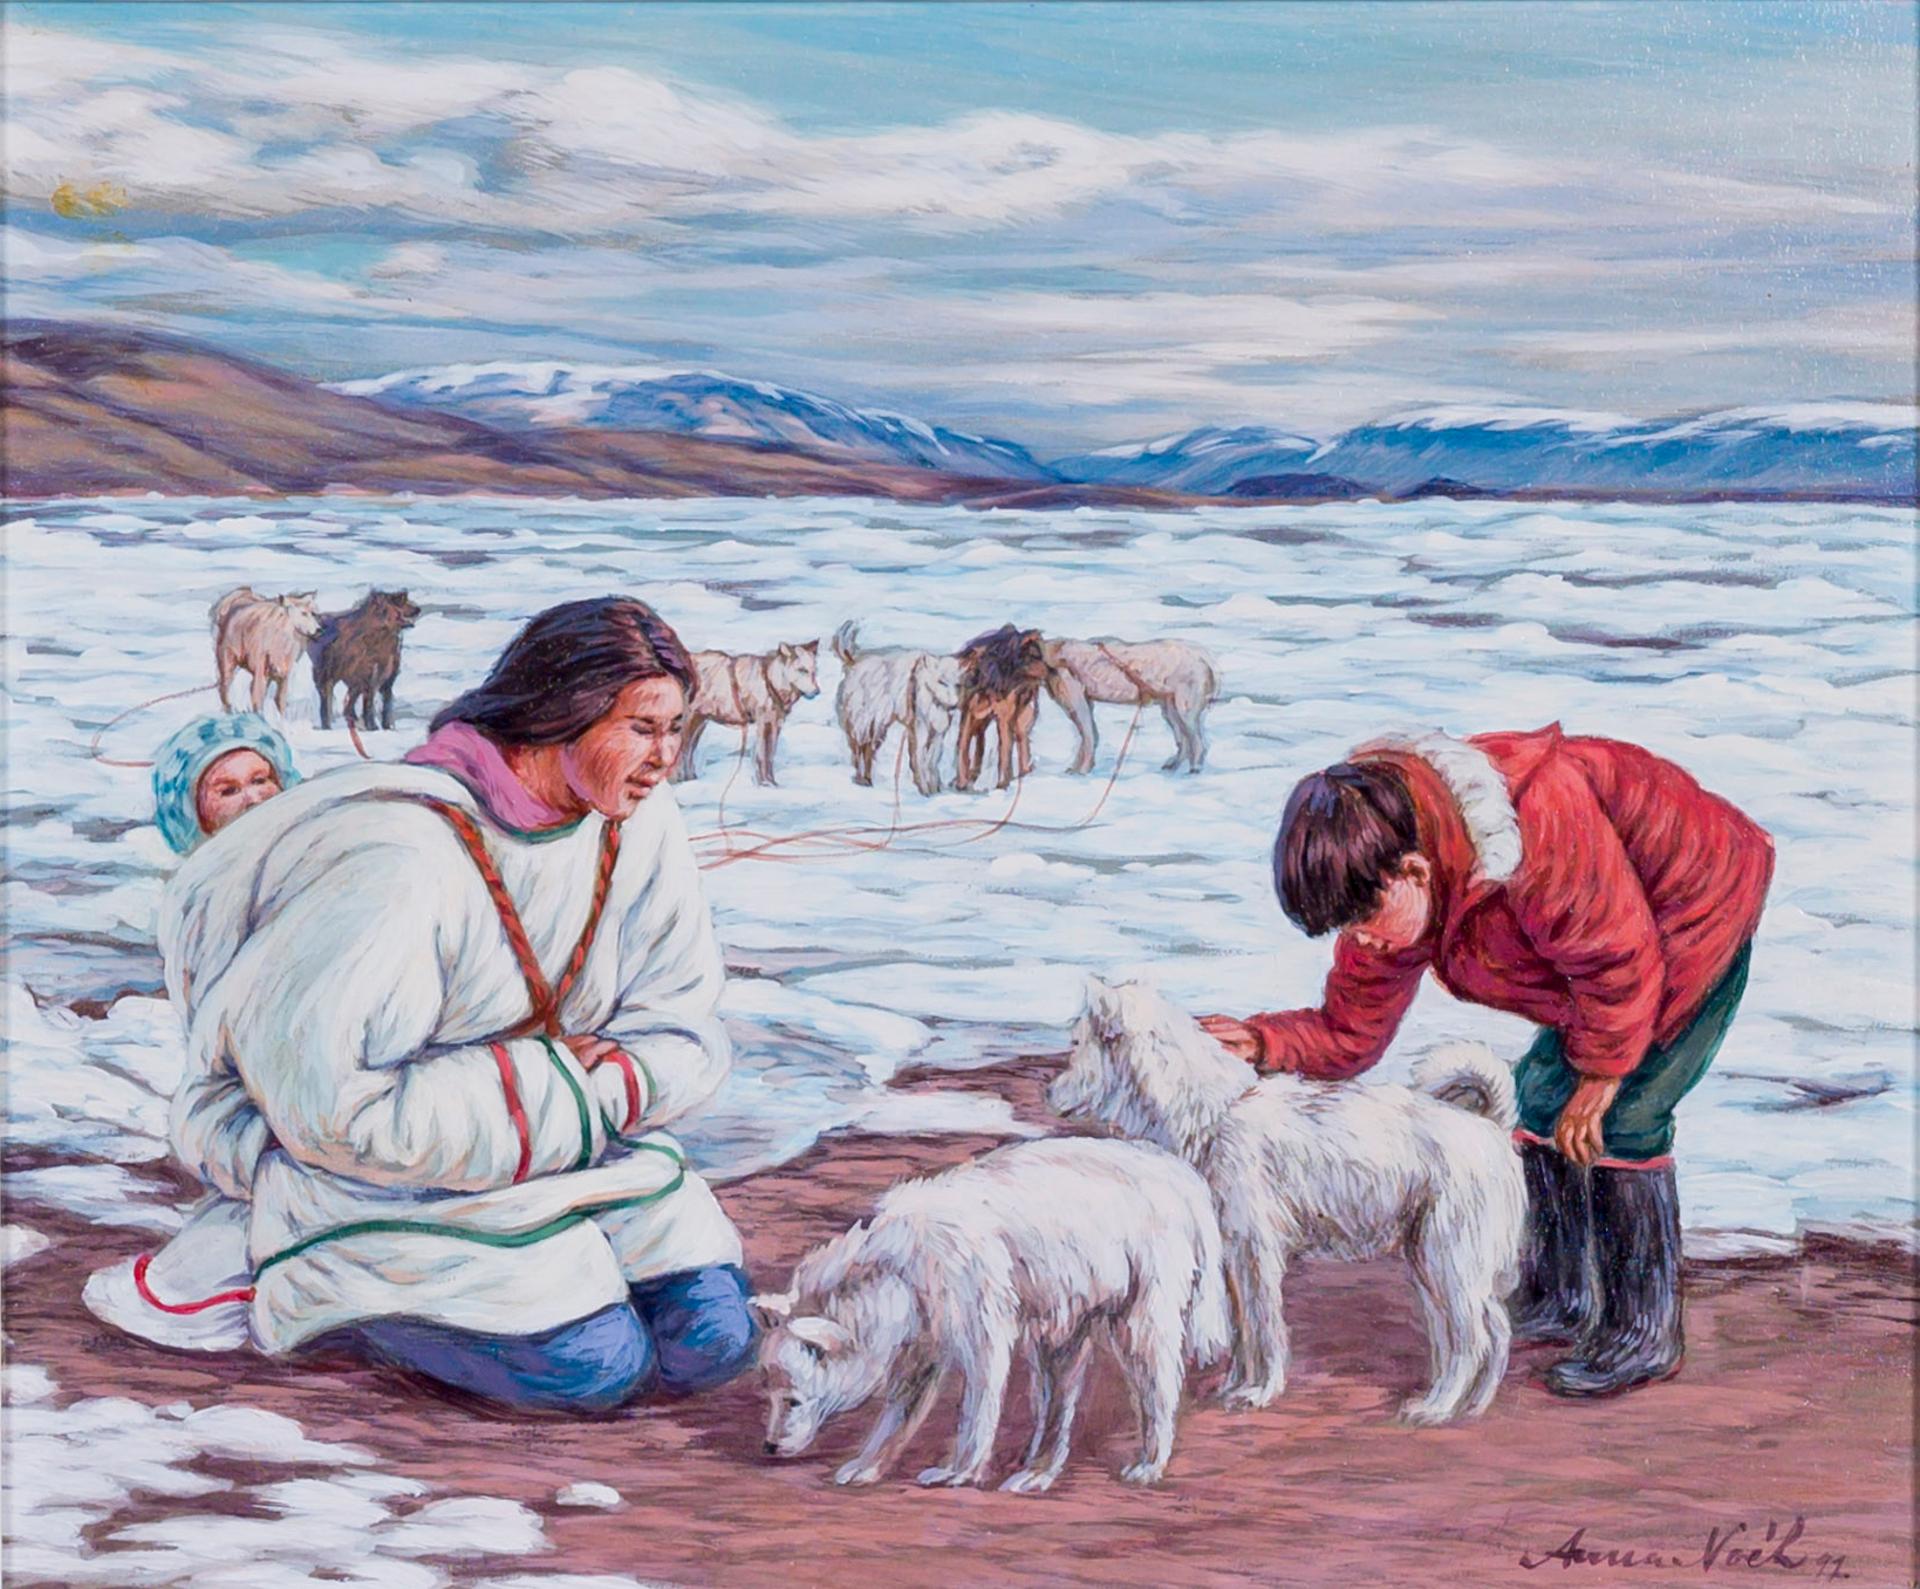 Anna T. Noeh (1926-2016) - Famille inuit avec chiens, 1992